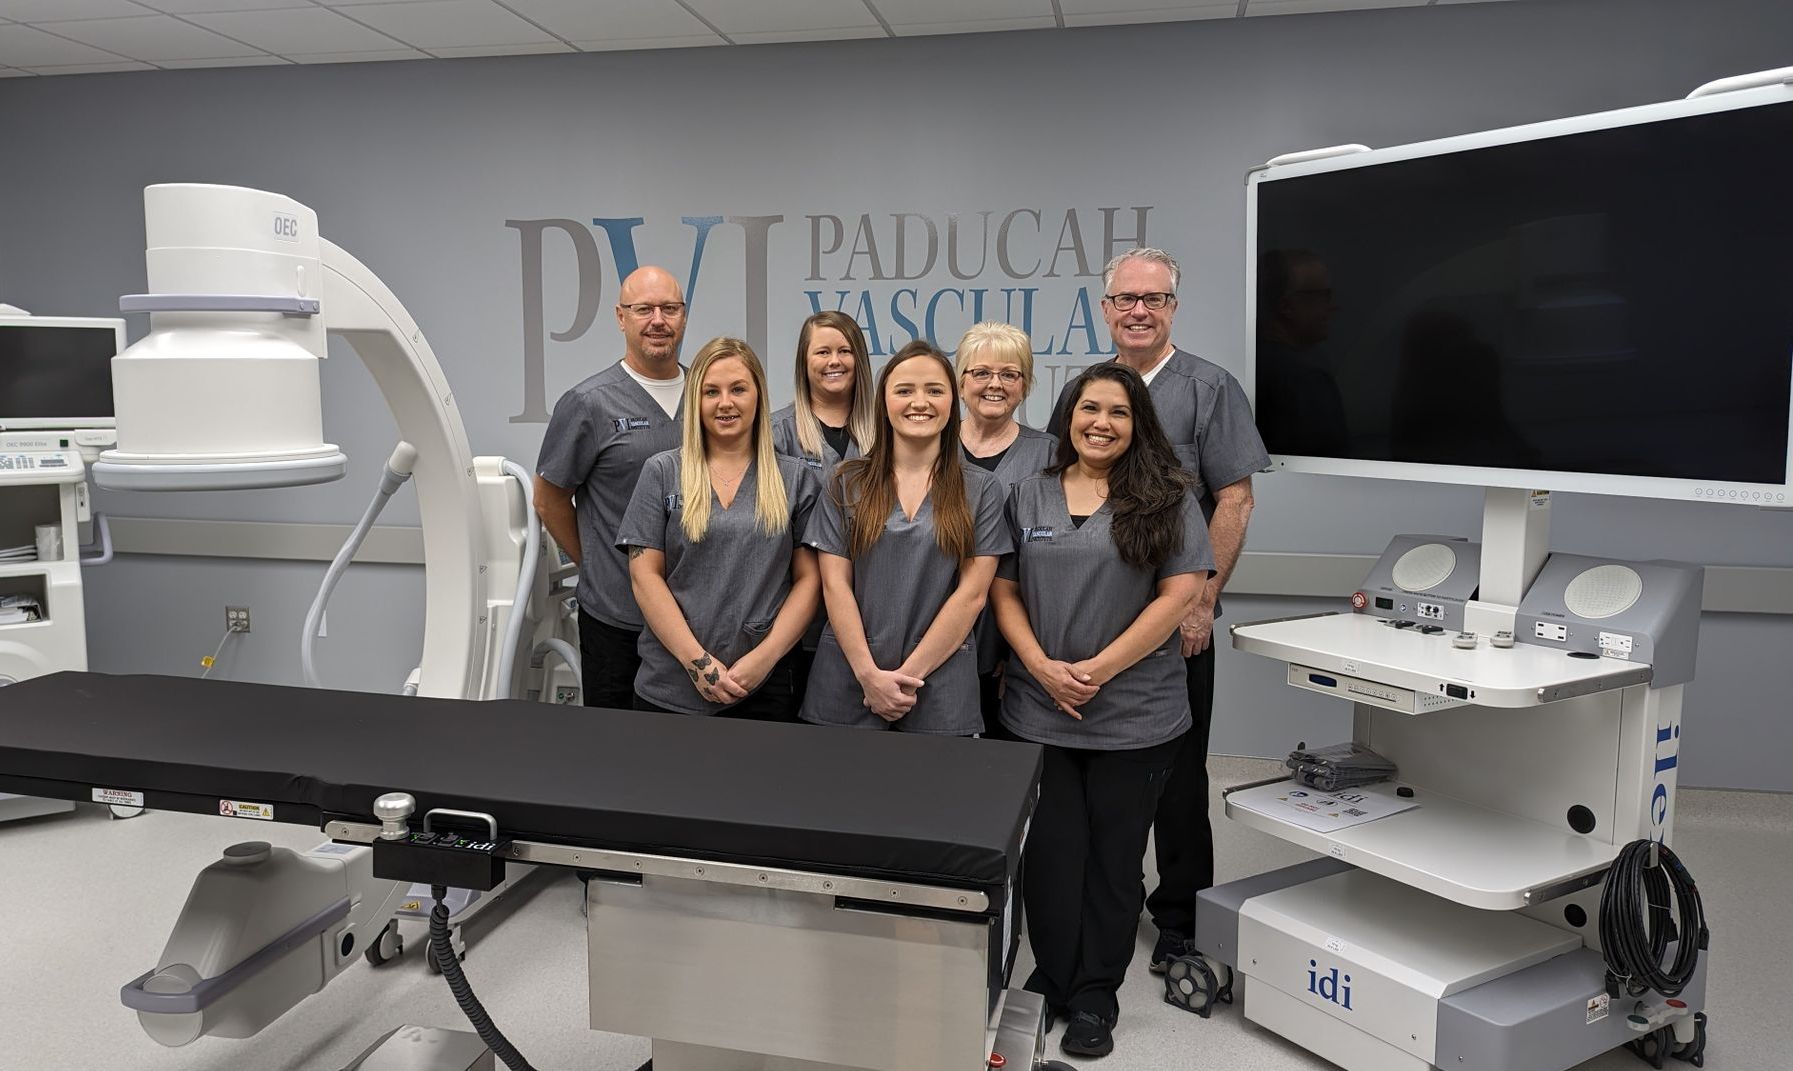 paducah vascular institute staff photo, a group of people standing in the operating room together